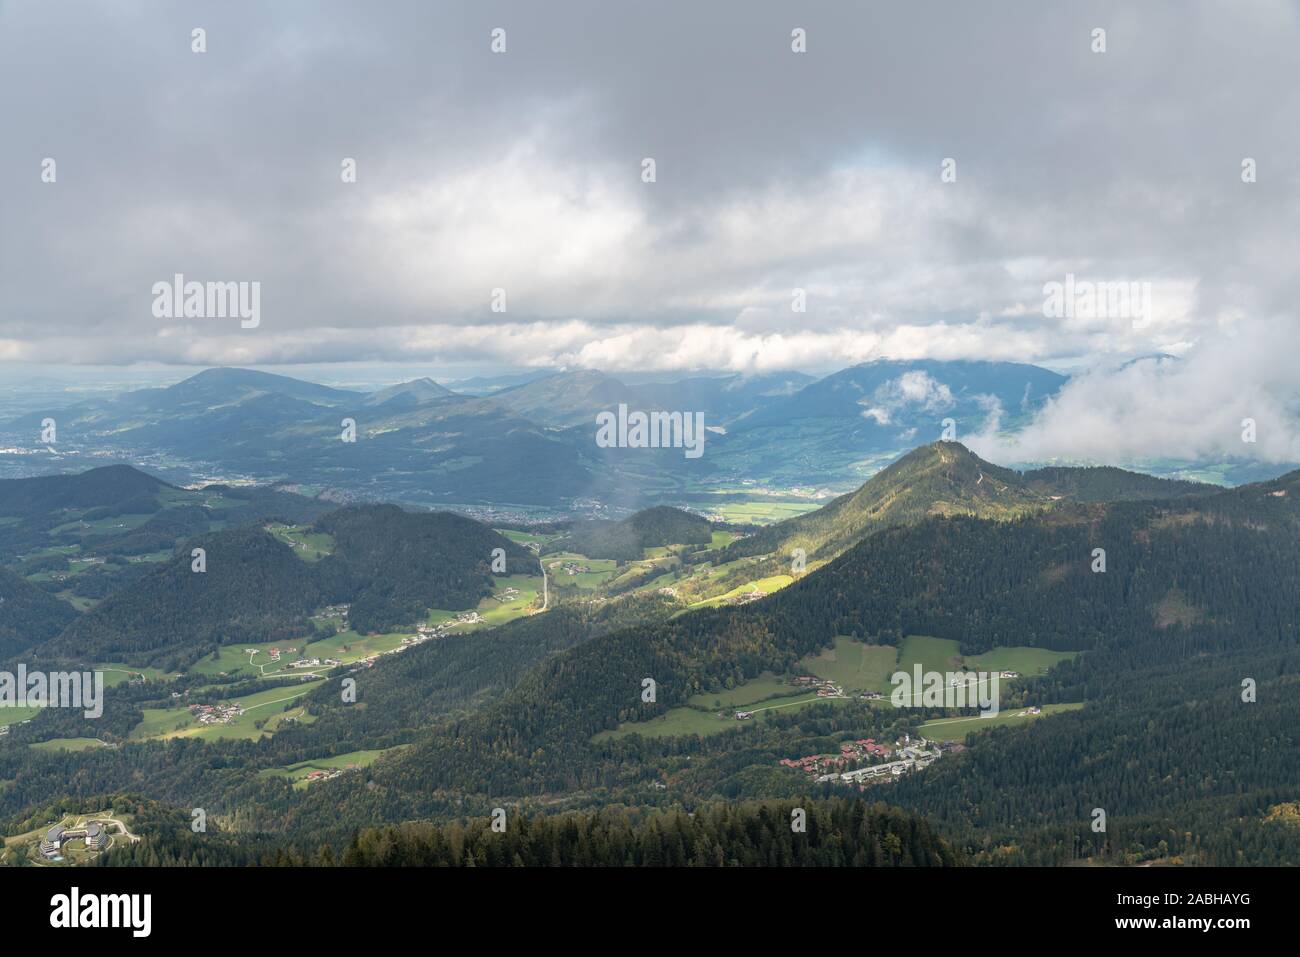 Panorama view of Berchtesgaden National Park from Kehlsteinhaus (Eagle's Nest) on top of Obersalzberg in Berchtesgaden, Bavaria, Germany Stock Photo